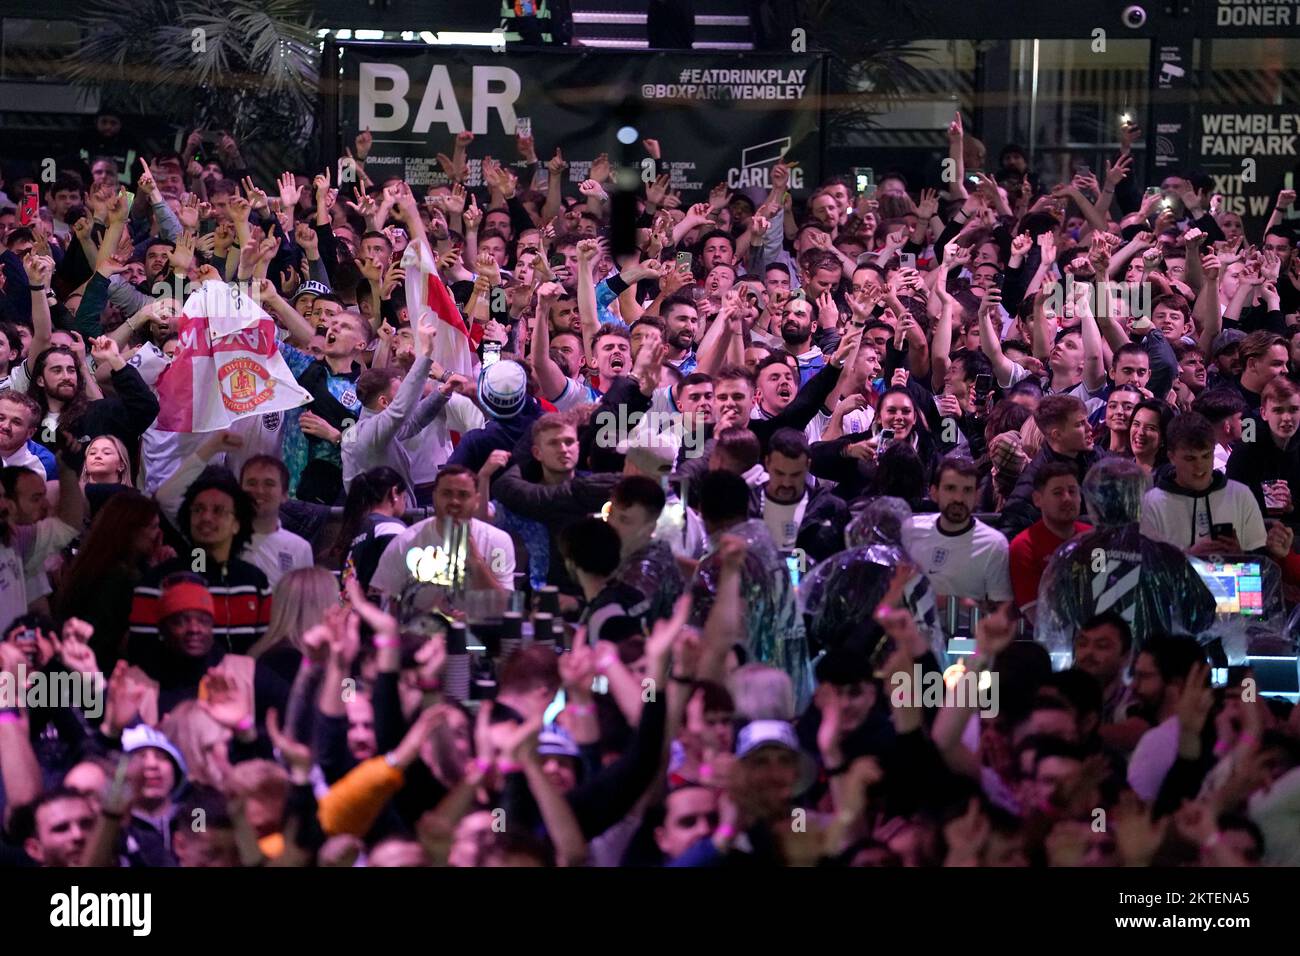 England fans at BoxPark Wembley celebrate their second goal scored by Phil Foden, during a screening of the FIFA World Cup Group B match between Wales and England. Picture date: Tuesday November 29, 2022. Stock Photo